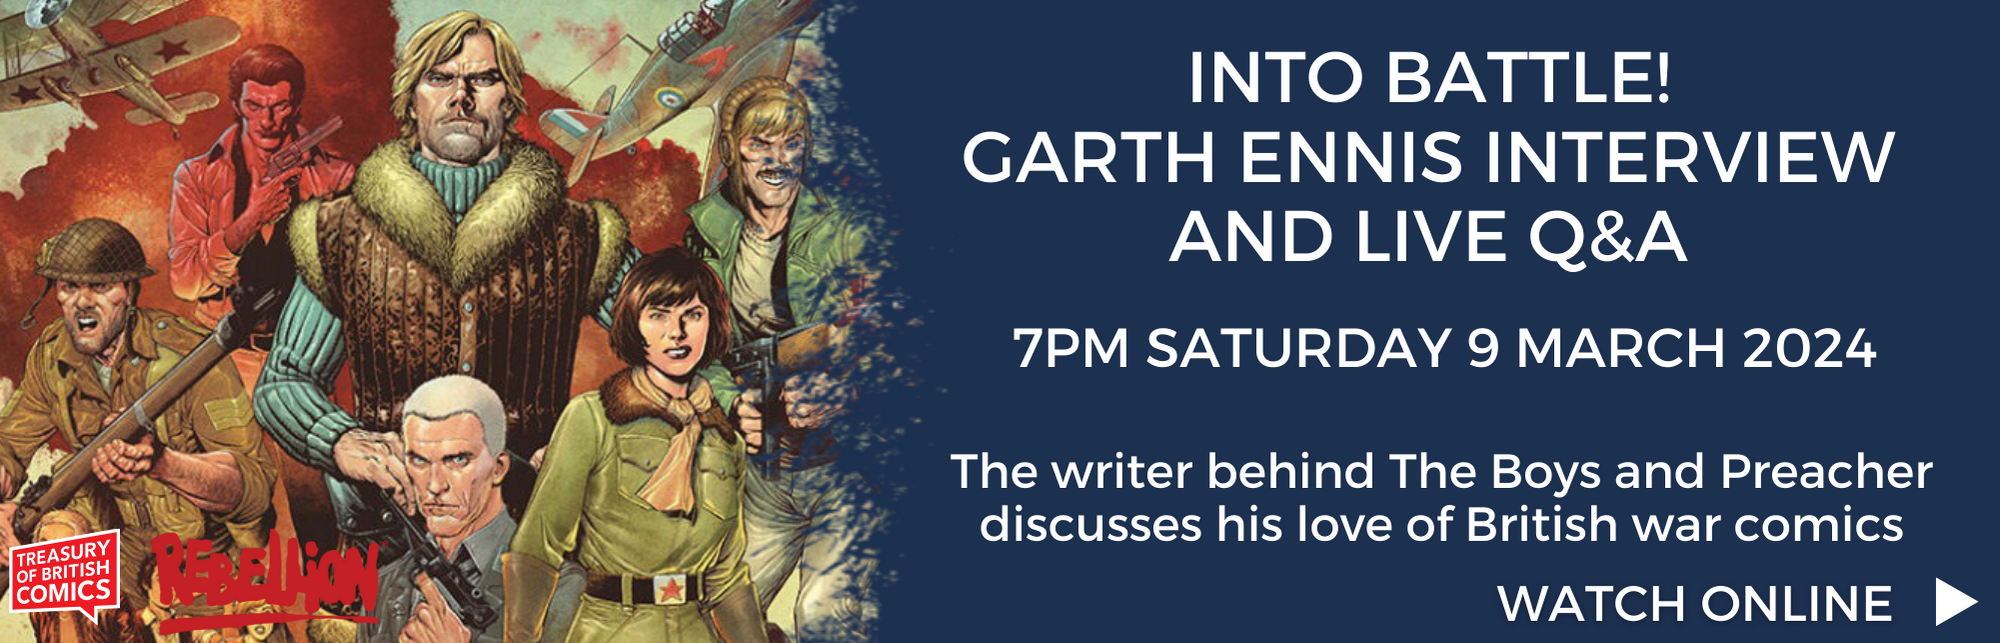 Click here to watch the online interview and live audience Q&A with Garth Ennis on British war comics (from 7pm Saturday 9 March 2024)